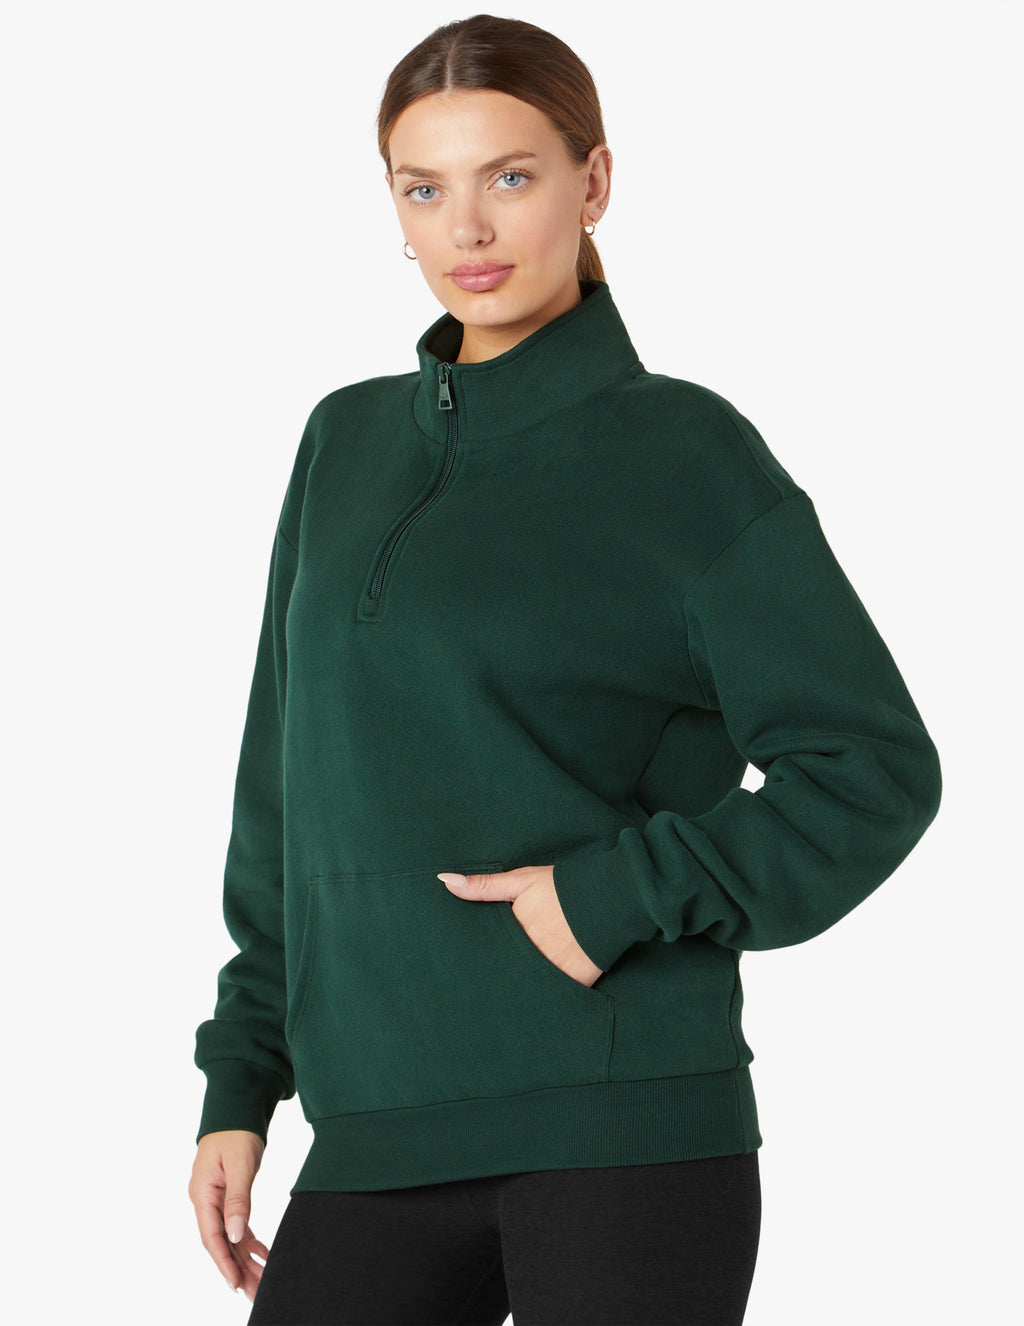 Recharge Pullover Featured Image